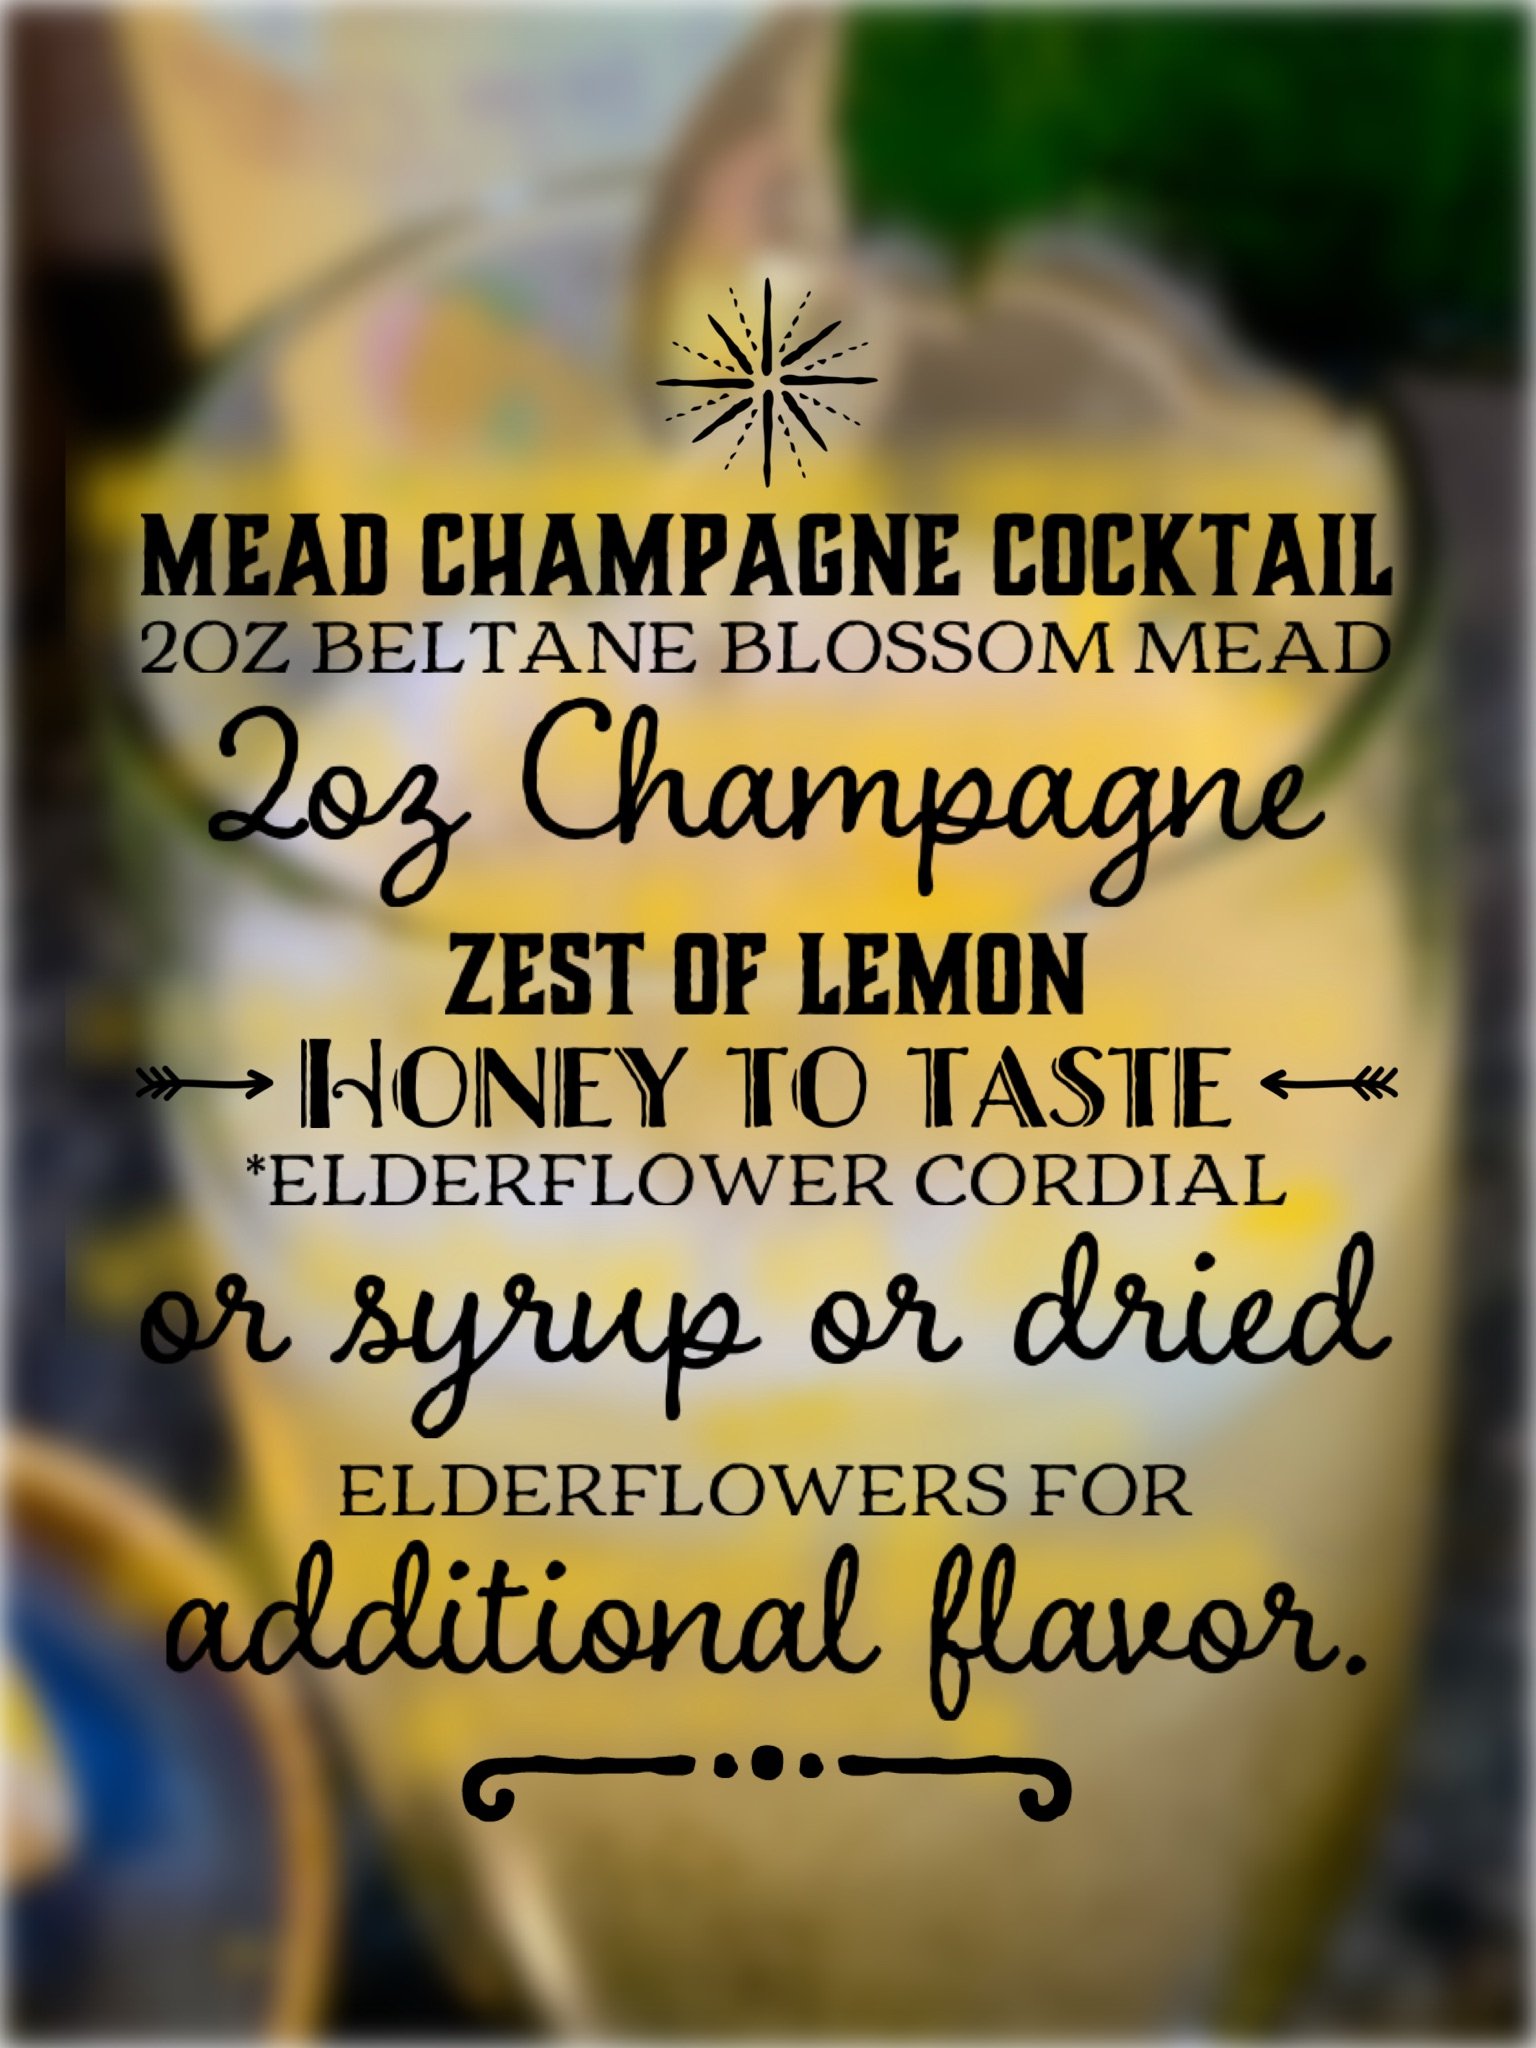 mead champagne cocktail recipe card.jpg